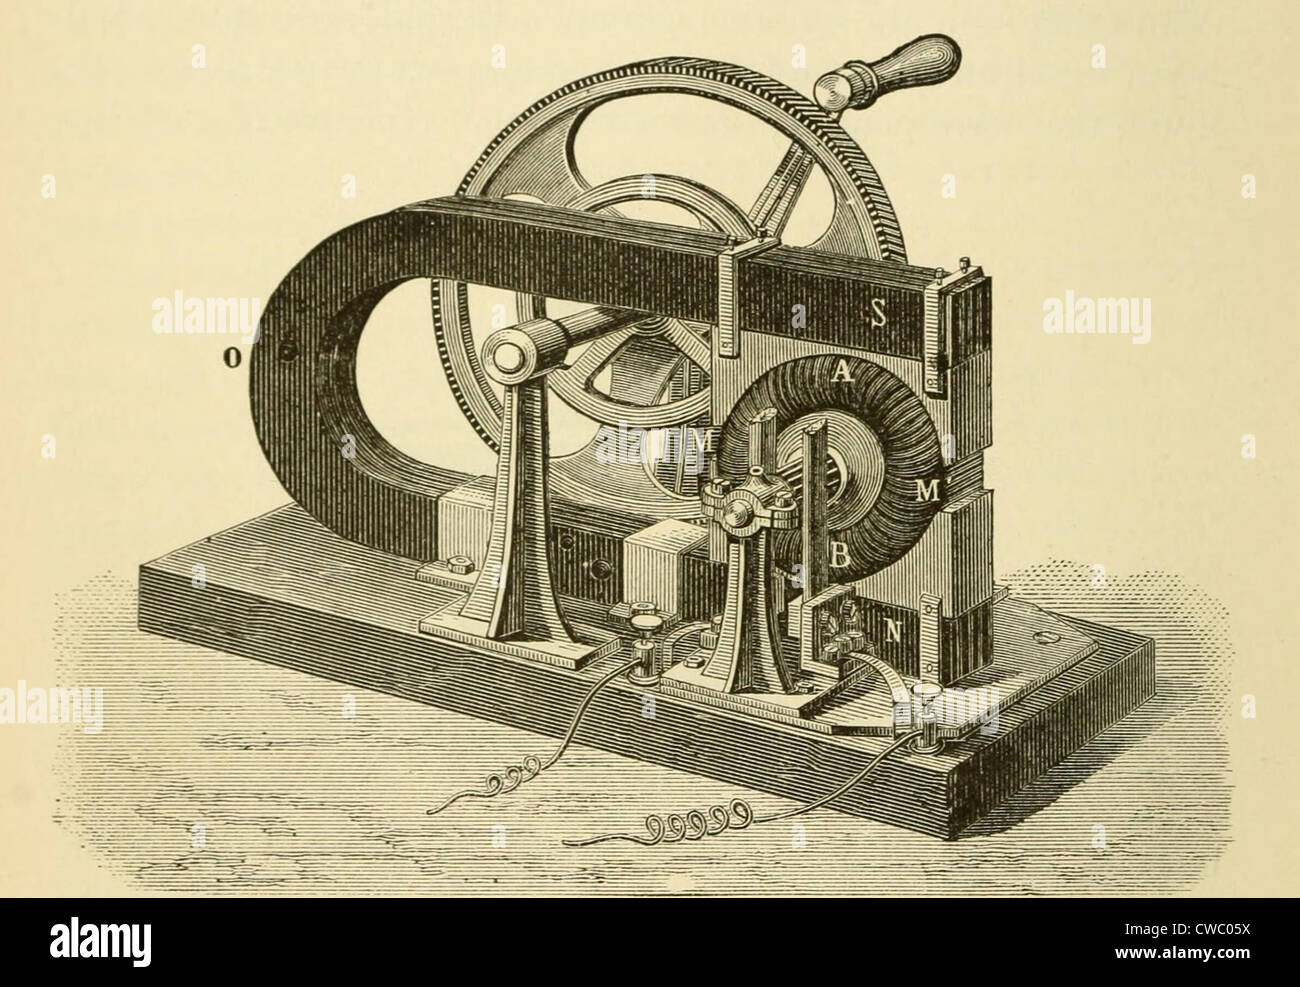 A hand cranked device onsisting of coiled metal wire and a magnet, demonstrate the principle elements of 19th and 20th century Stock Photo